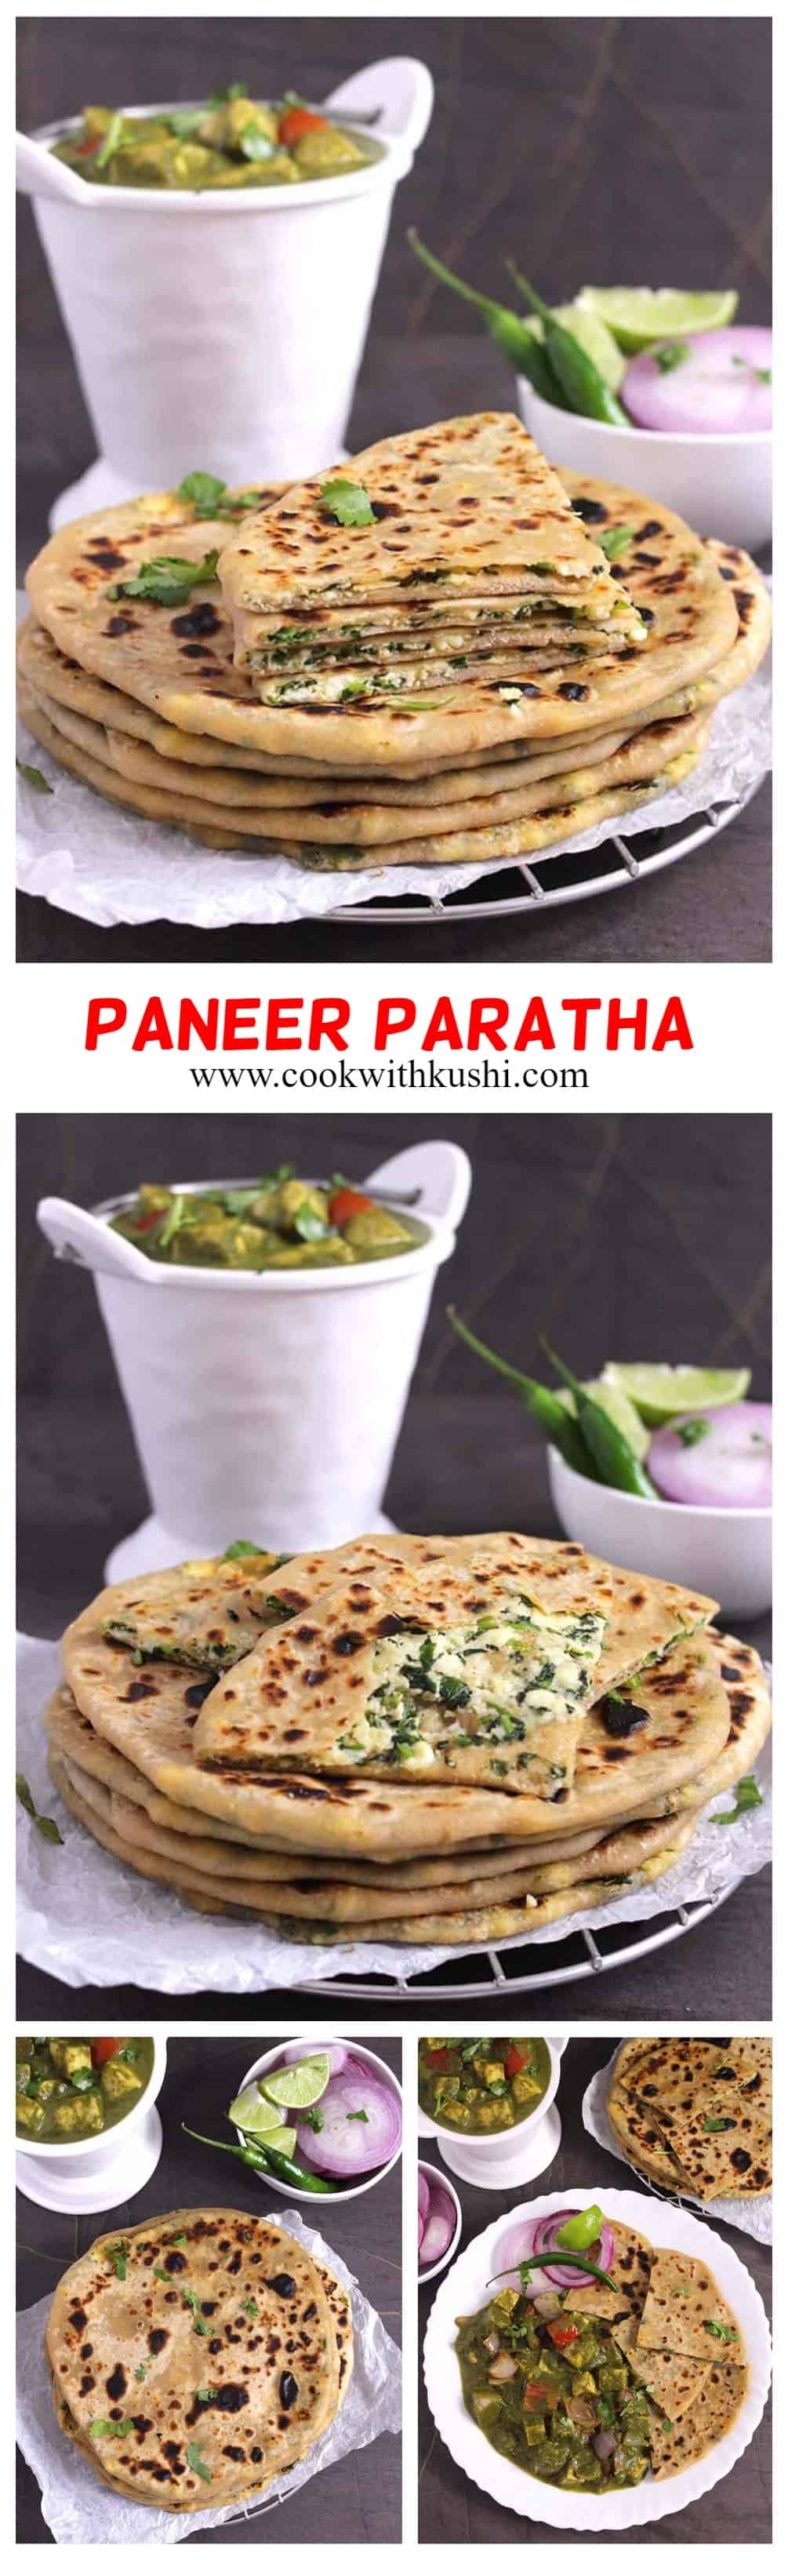 Paneer Paratha is delicious and easy to make protein packed Indian flatbread prepared using whole wheat flour (atta), paneer (Indian cotage cheese) and few herbs and spices. #paneer #fetacheese #cottagecheese #ricotta #indiancheese #bread #paratha #Naan #kulcha #roti #chapati